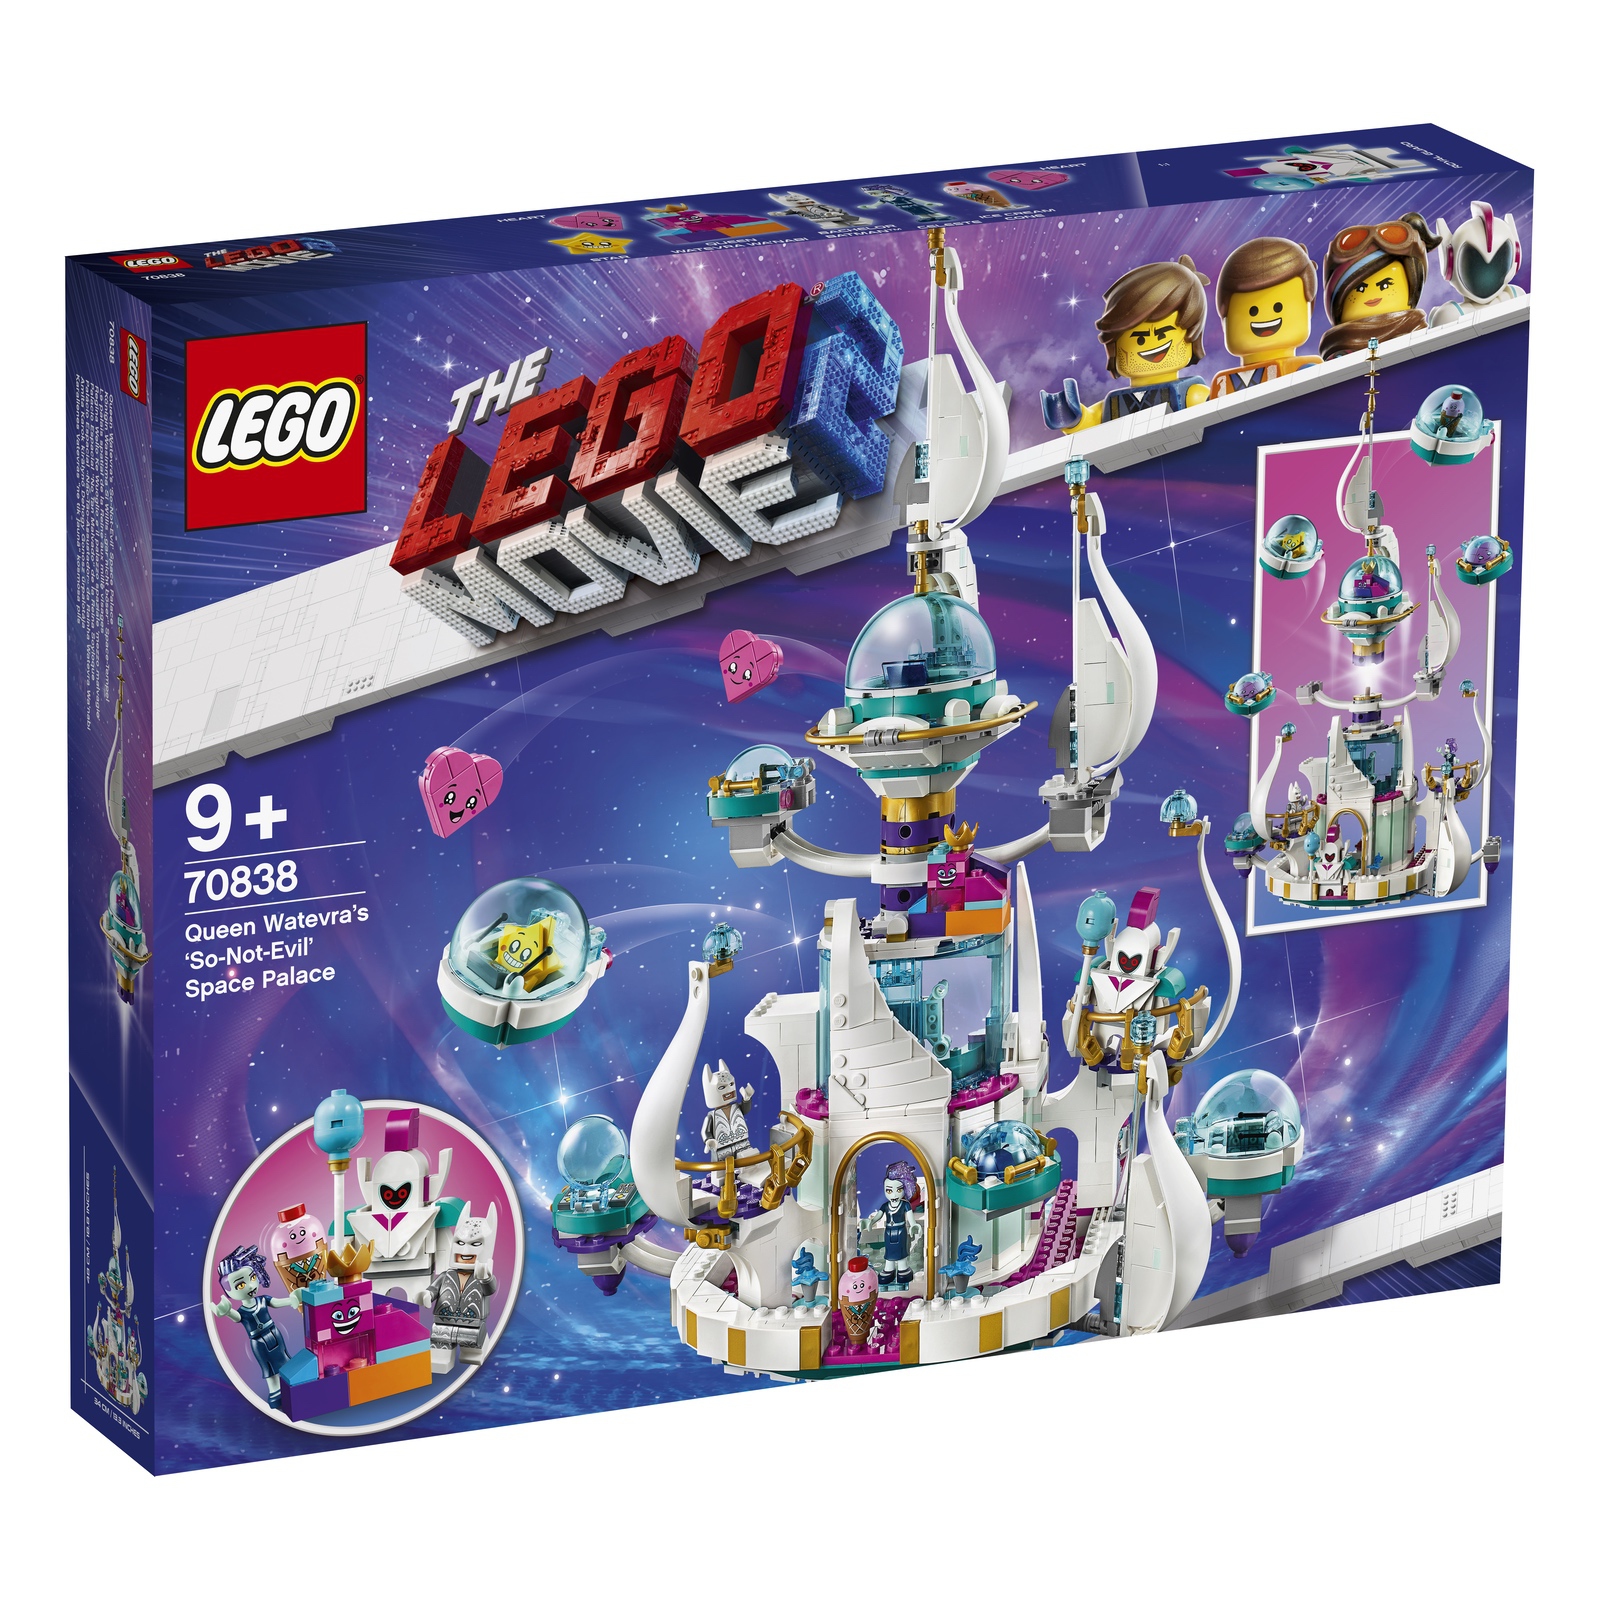 LEGO adds three more LEGO Movie 2 sets | The